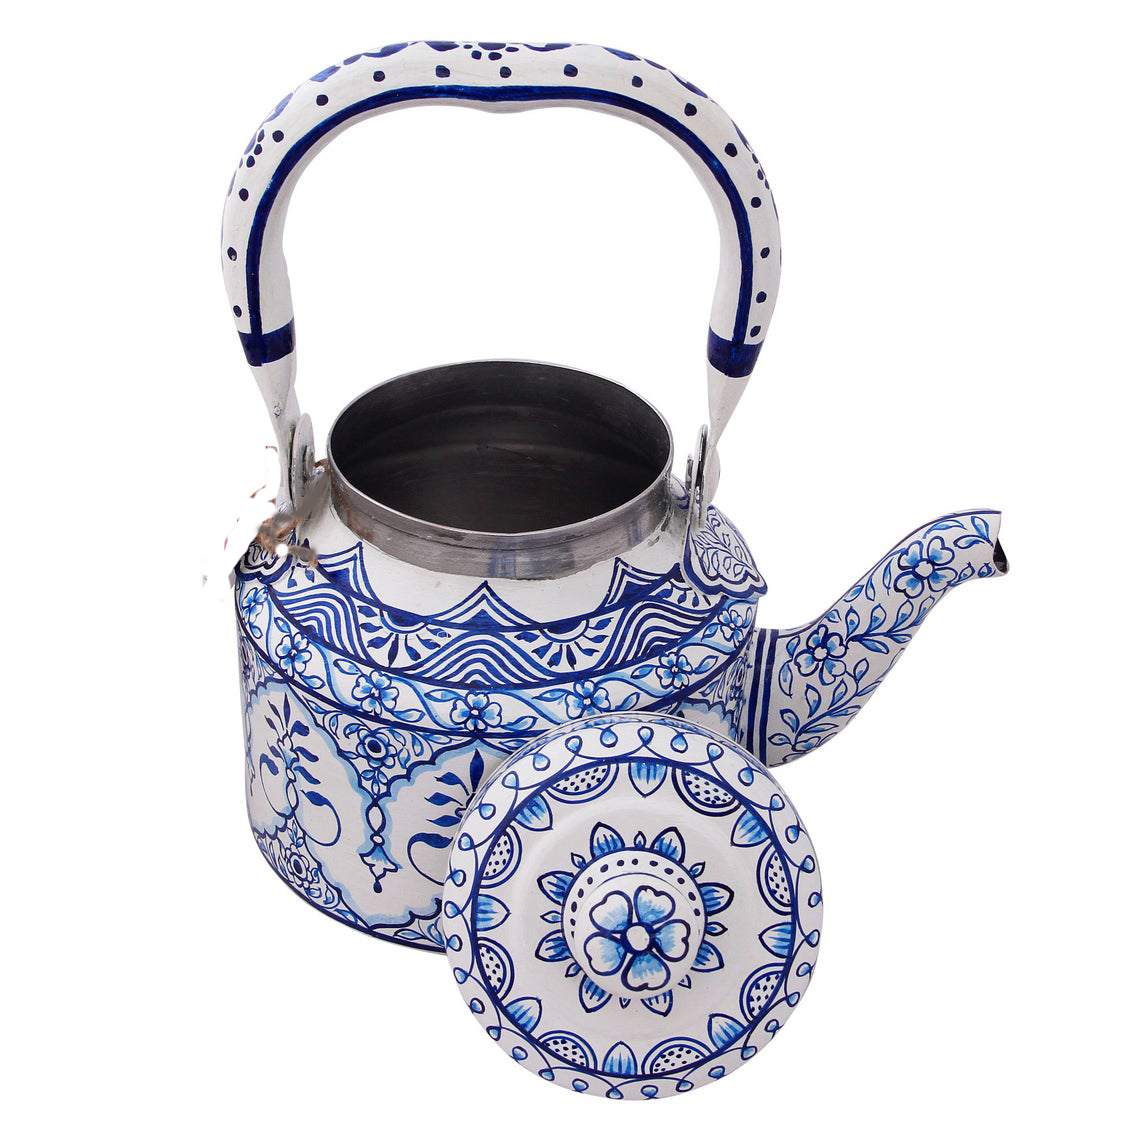 Antique Hand painted tea kettle Interior Design : White & Blue Chai Kettle, Traditional Indian tea kettle, Tea brewer, Gift for tea lovers